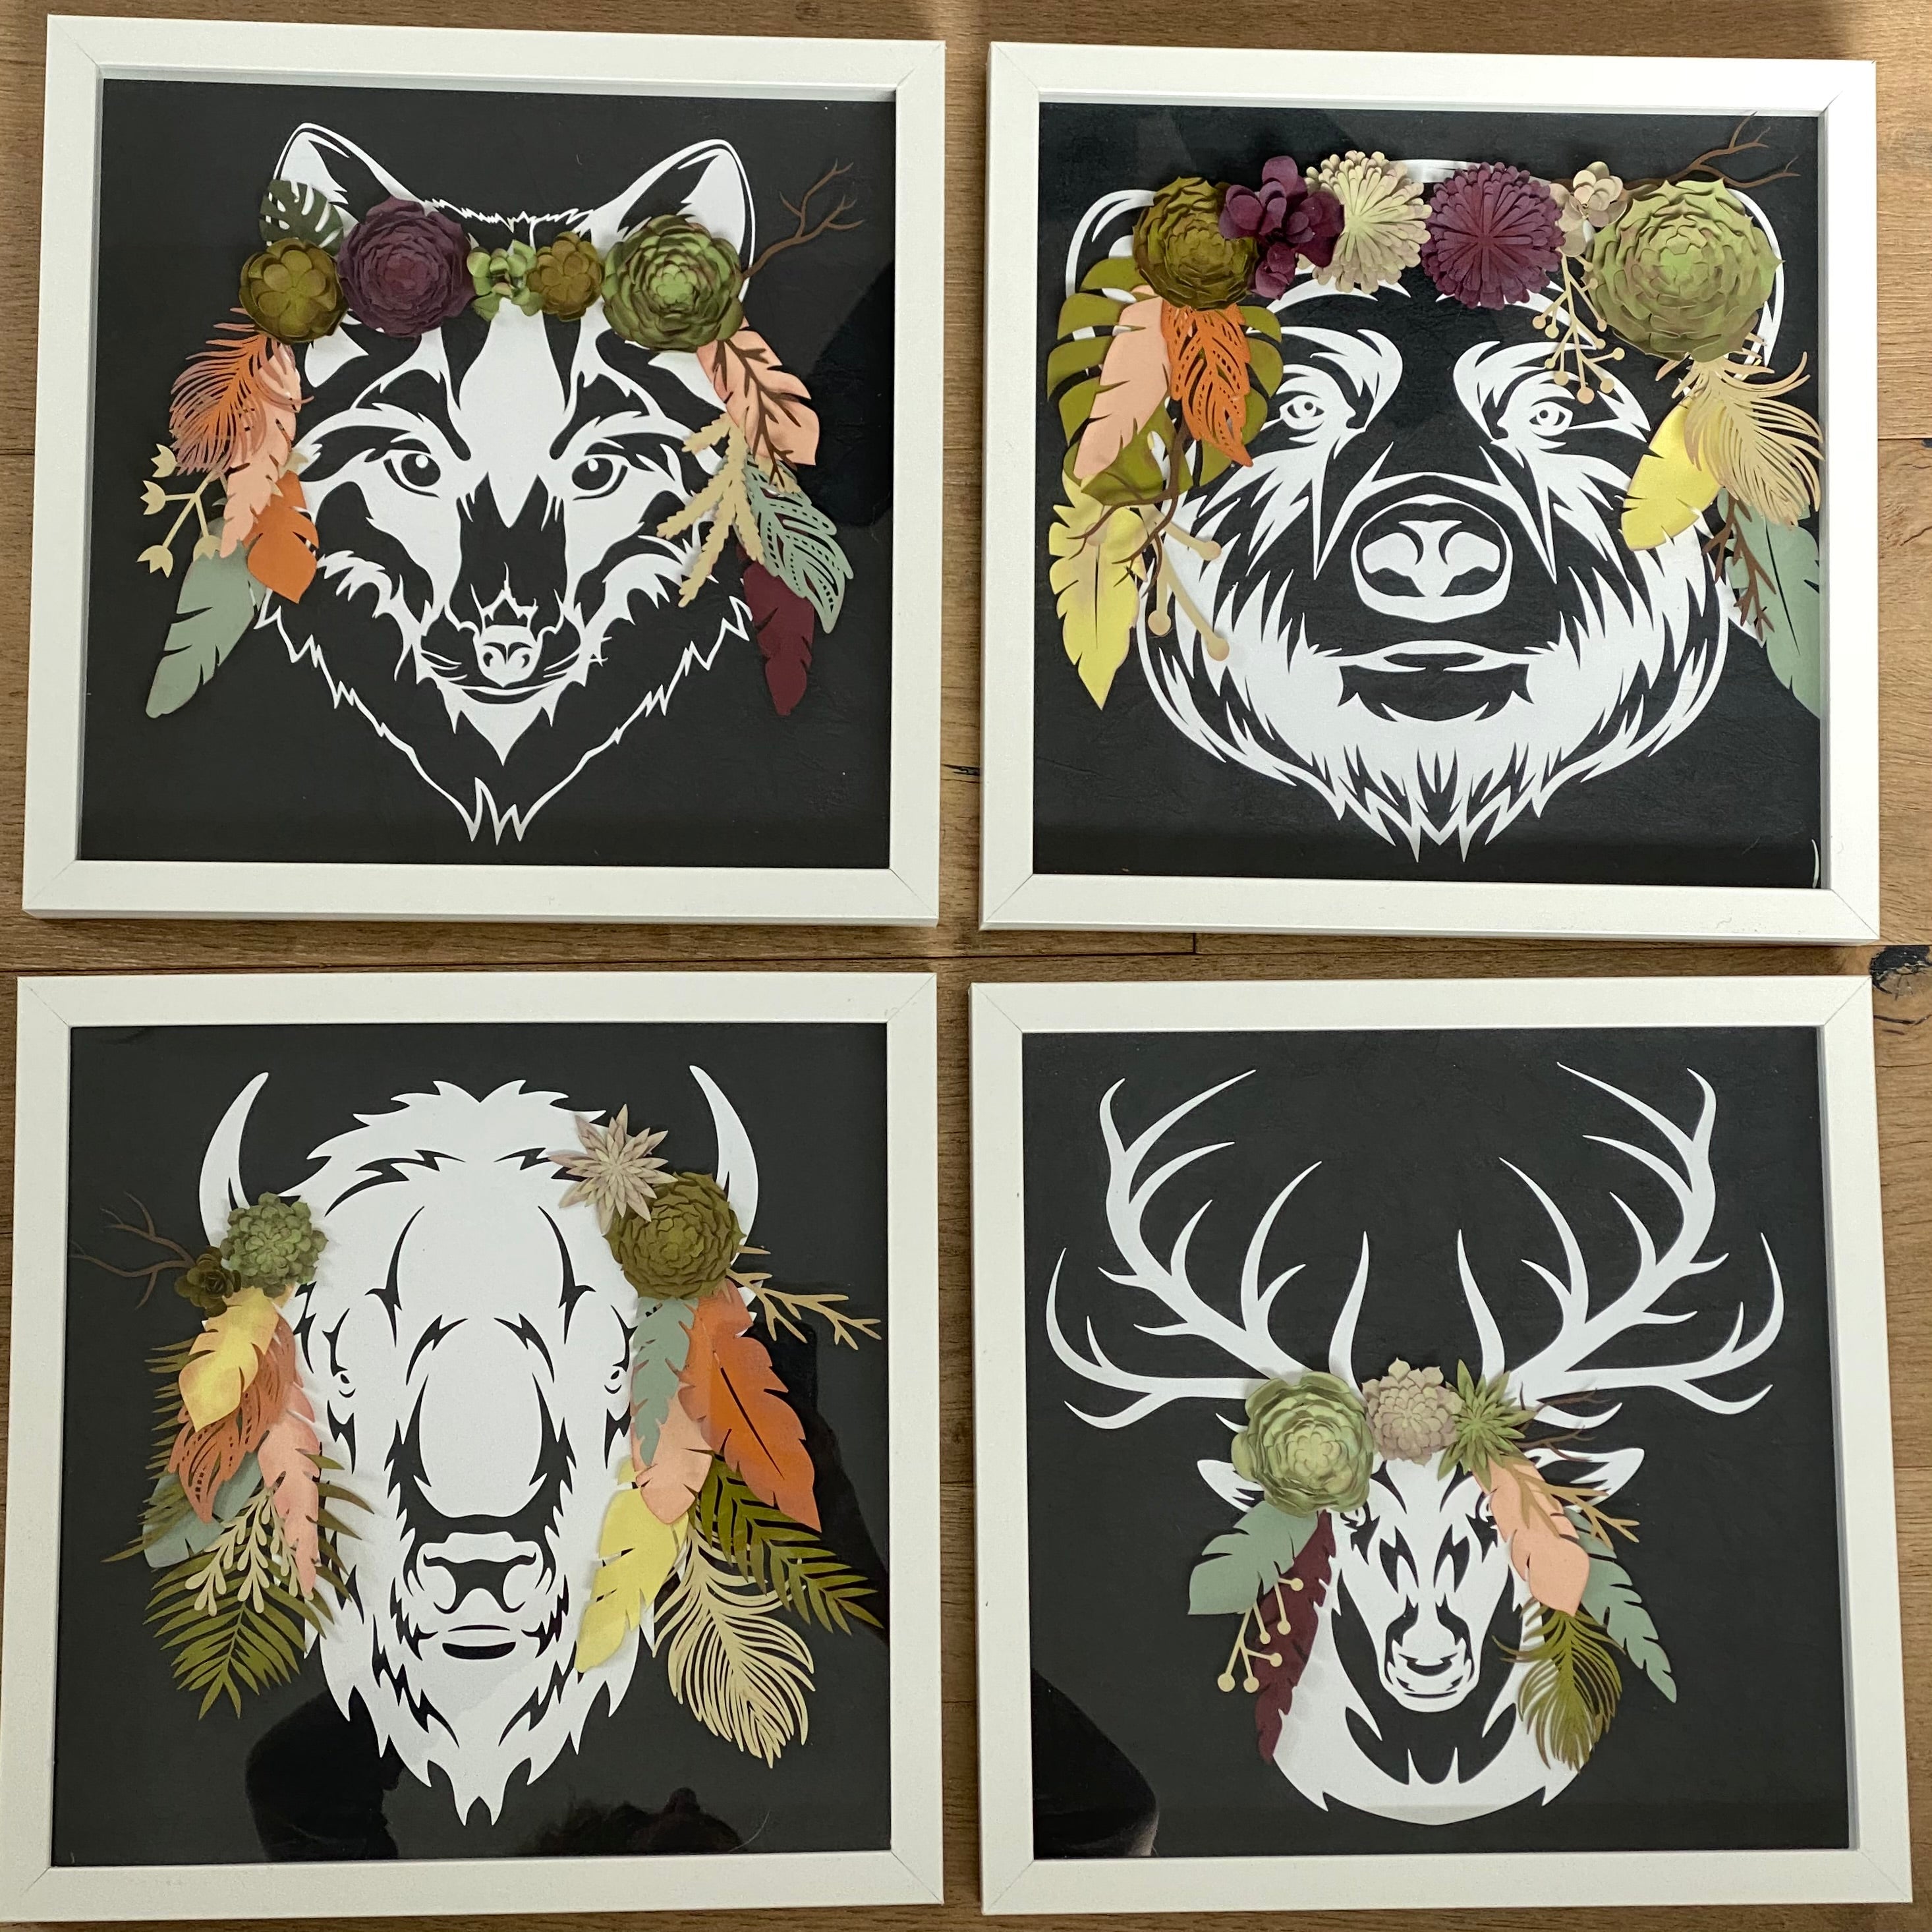 Decorated Deer - Paper Art featuring Deer/Elk with a Succulent, Feather, and Fern Crown